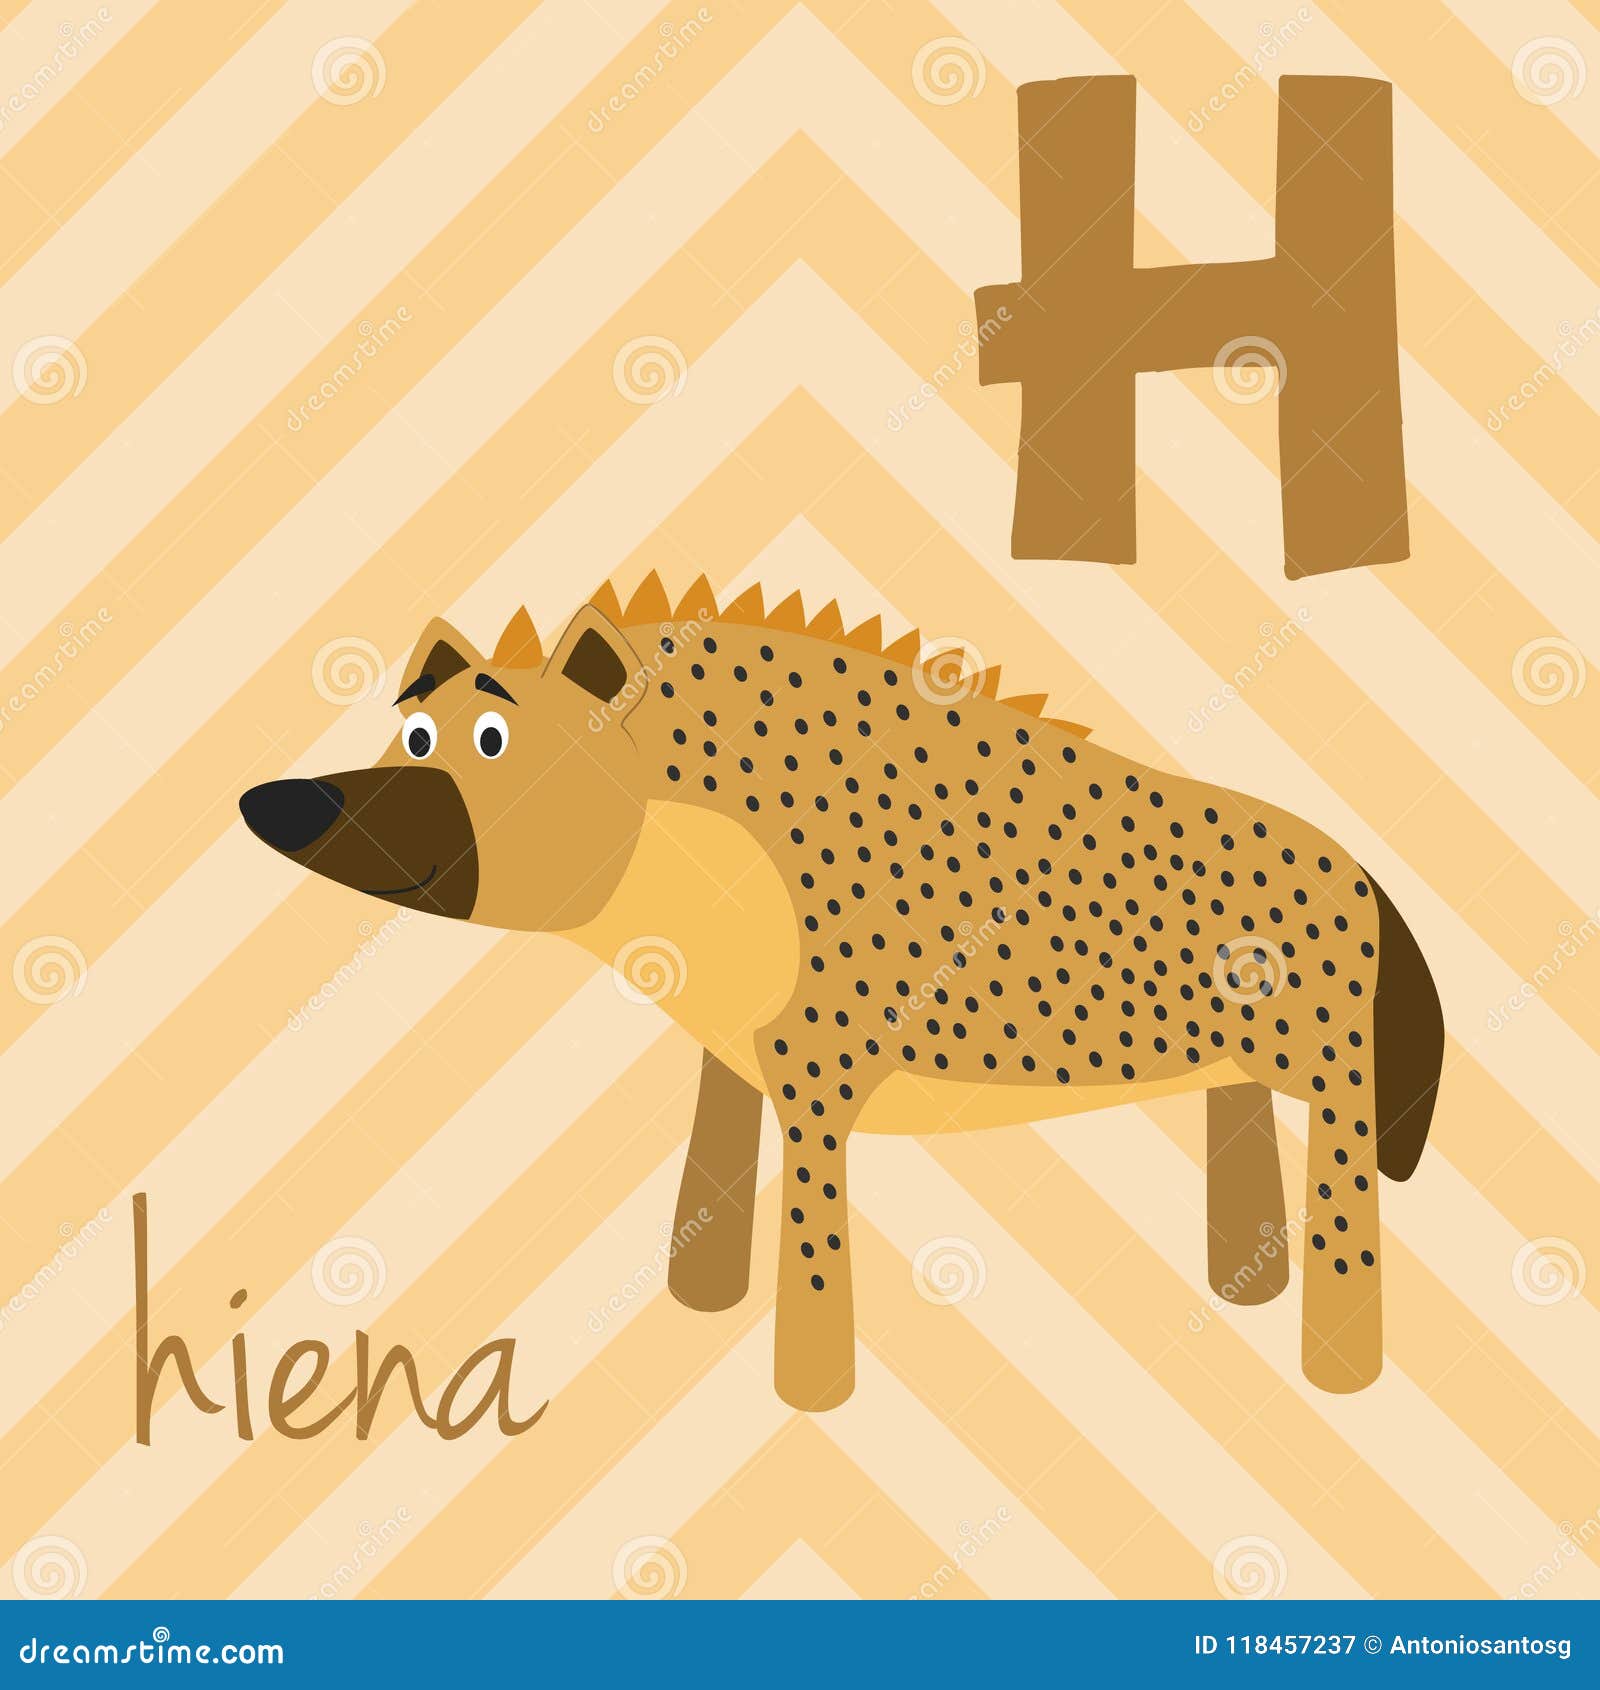 cute cartoon zoo illustrated alphabet with funny animals. spanish alphabet: h for hiena.